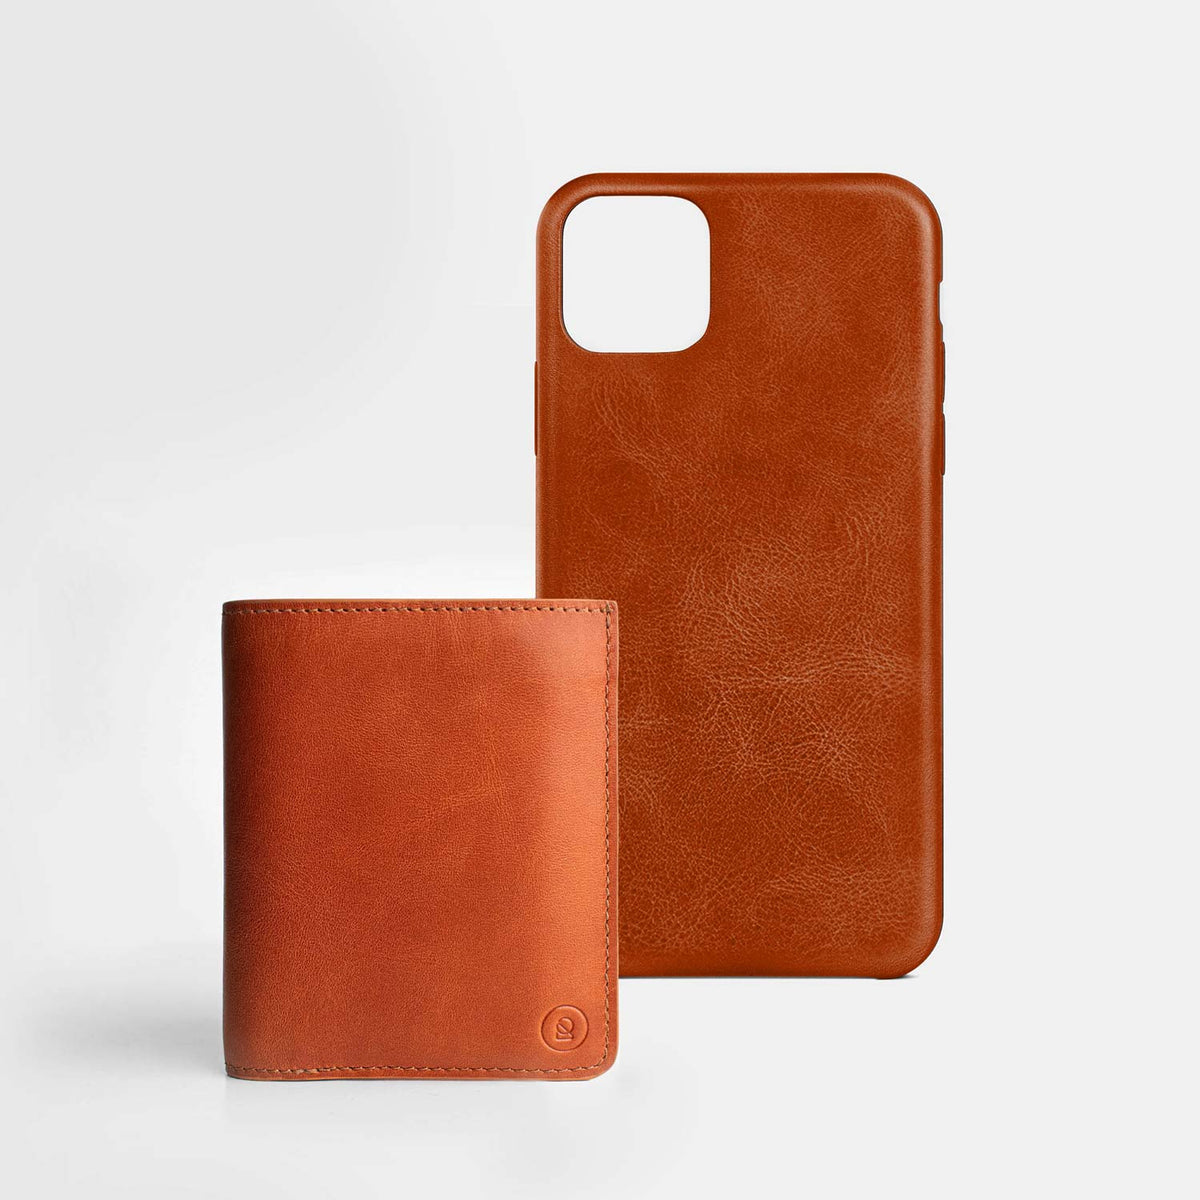 Leather iPhone 11 Pro Max Shell Case - Saddle Brown - RYAN London